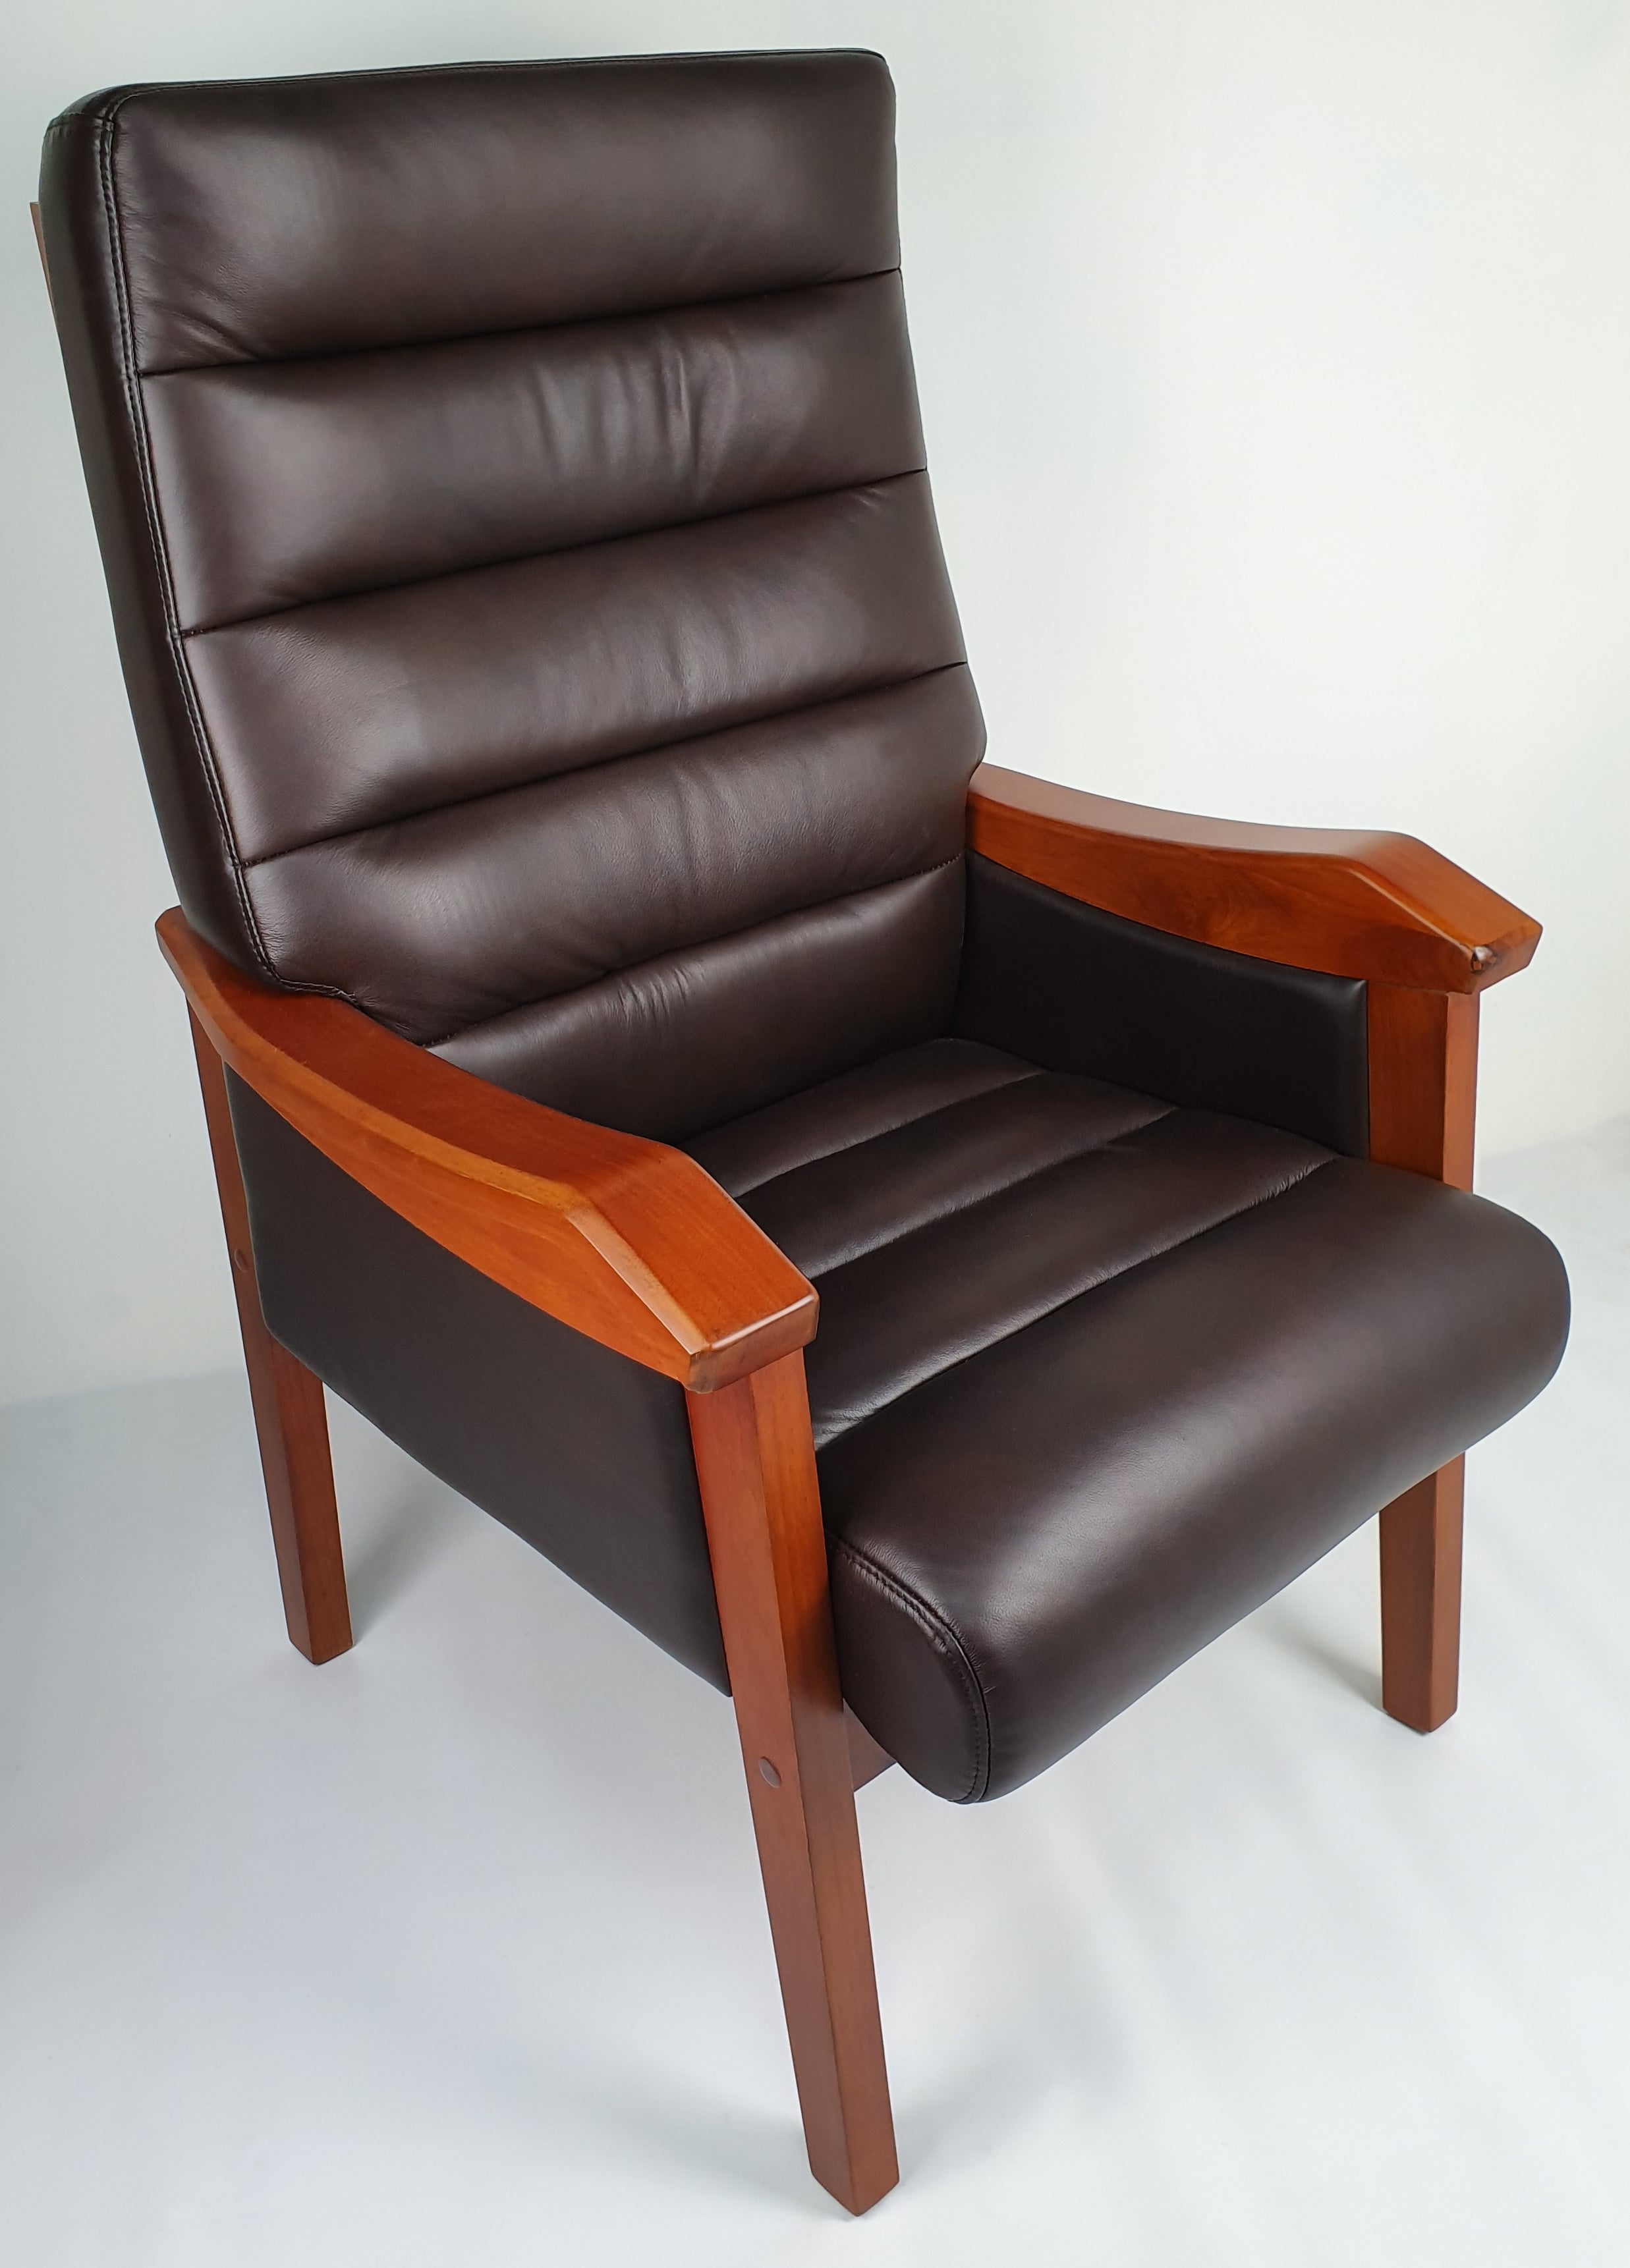 Senato CHA-FK8C Visitor Chair Brown Leather with Teak Frame